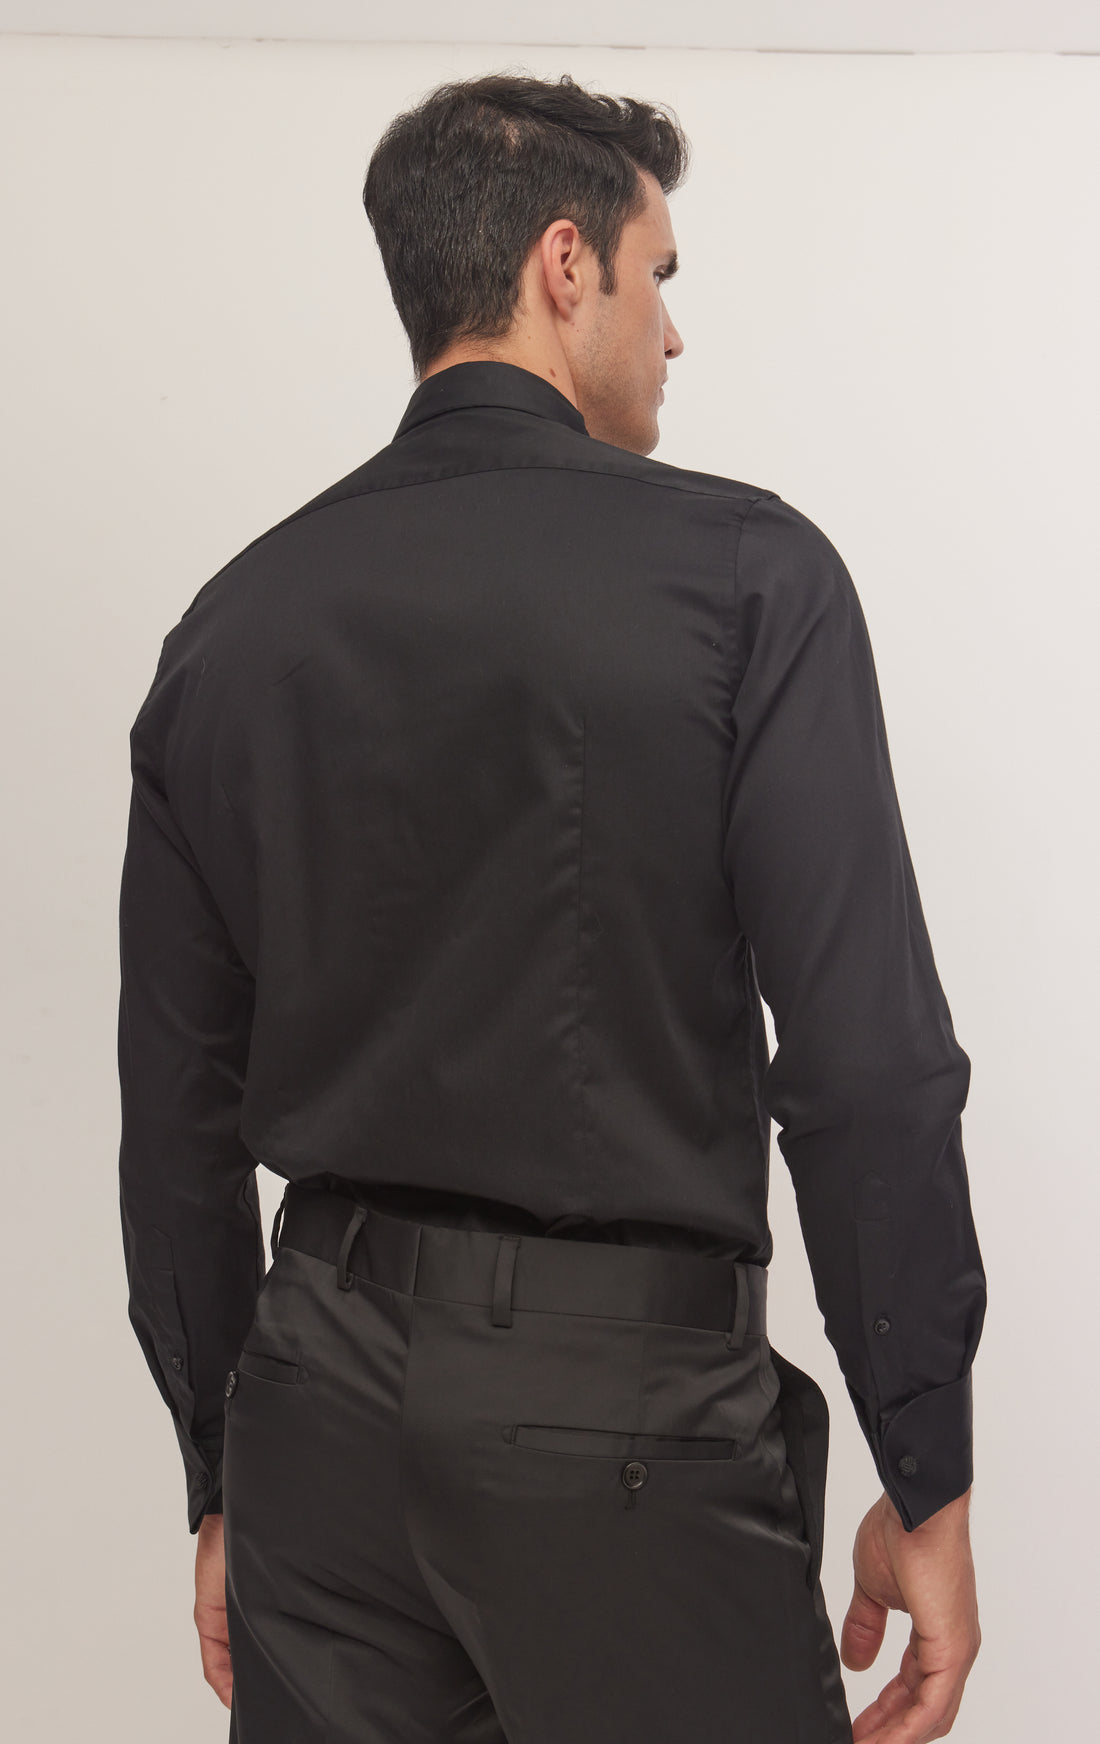 N° 4715 WING CLASSICAL TOP 3 FRONT STUD TUXEDO SHIRT - BLACK